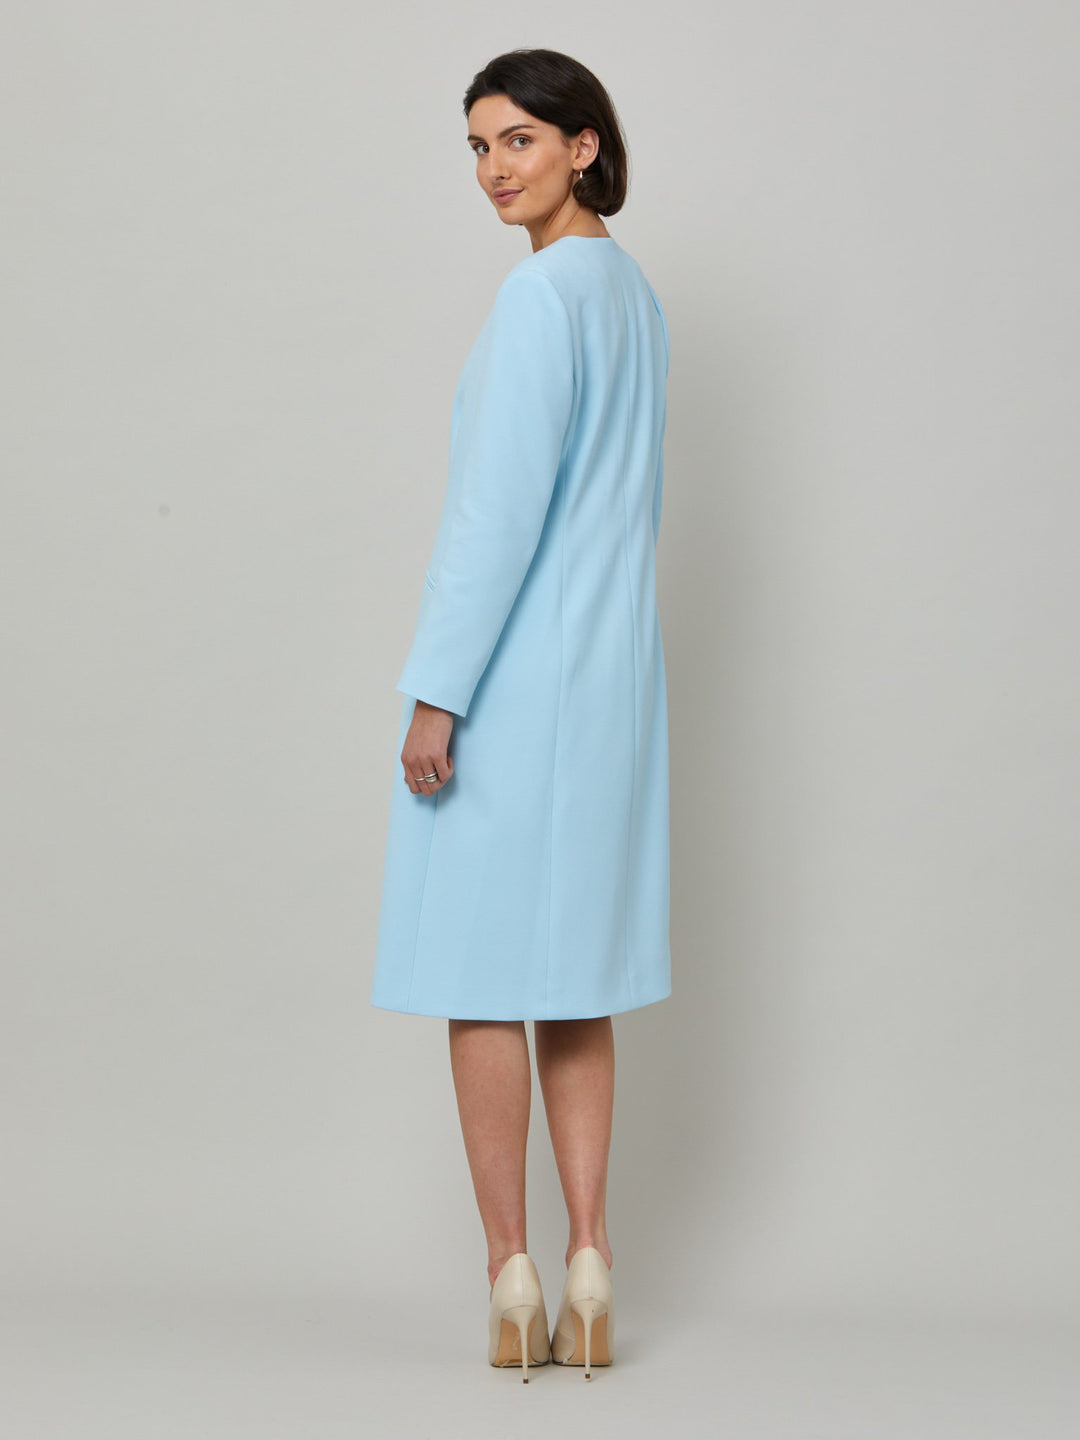 Meet Julia, the ultimate guest coat in vibrant sky blue. Body skimming silhouette, jewel neckline and elegant scallop front conceals a zip fastening. Attending a summer wedding? Mother of the bride? Heading to the races? This is the dress for you.